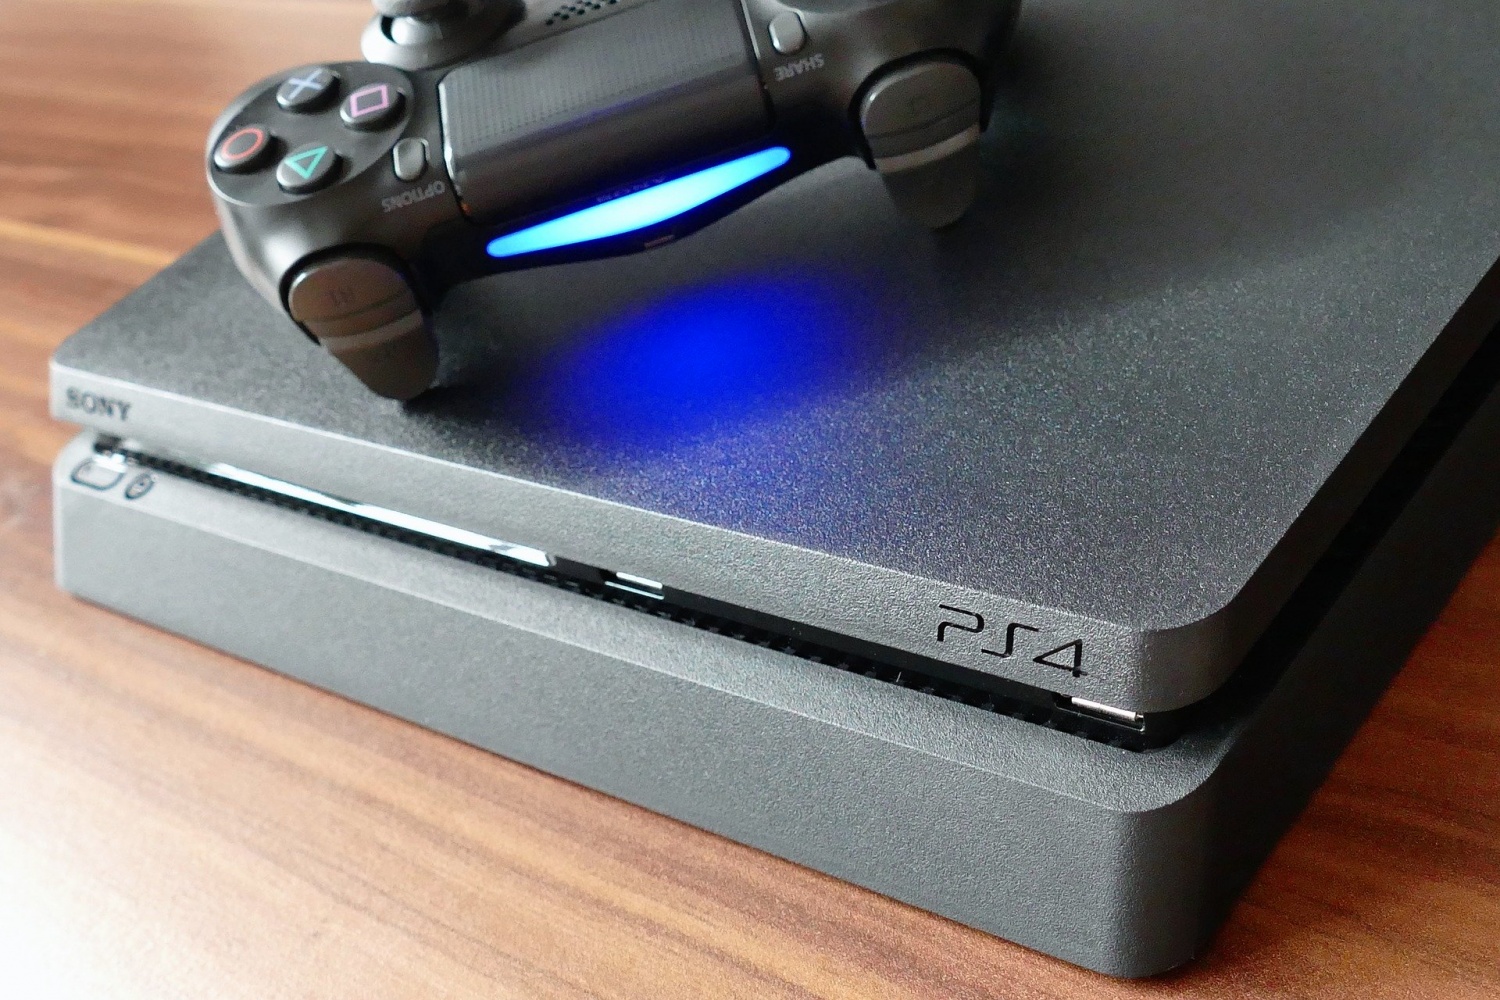 best deals for ps4